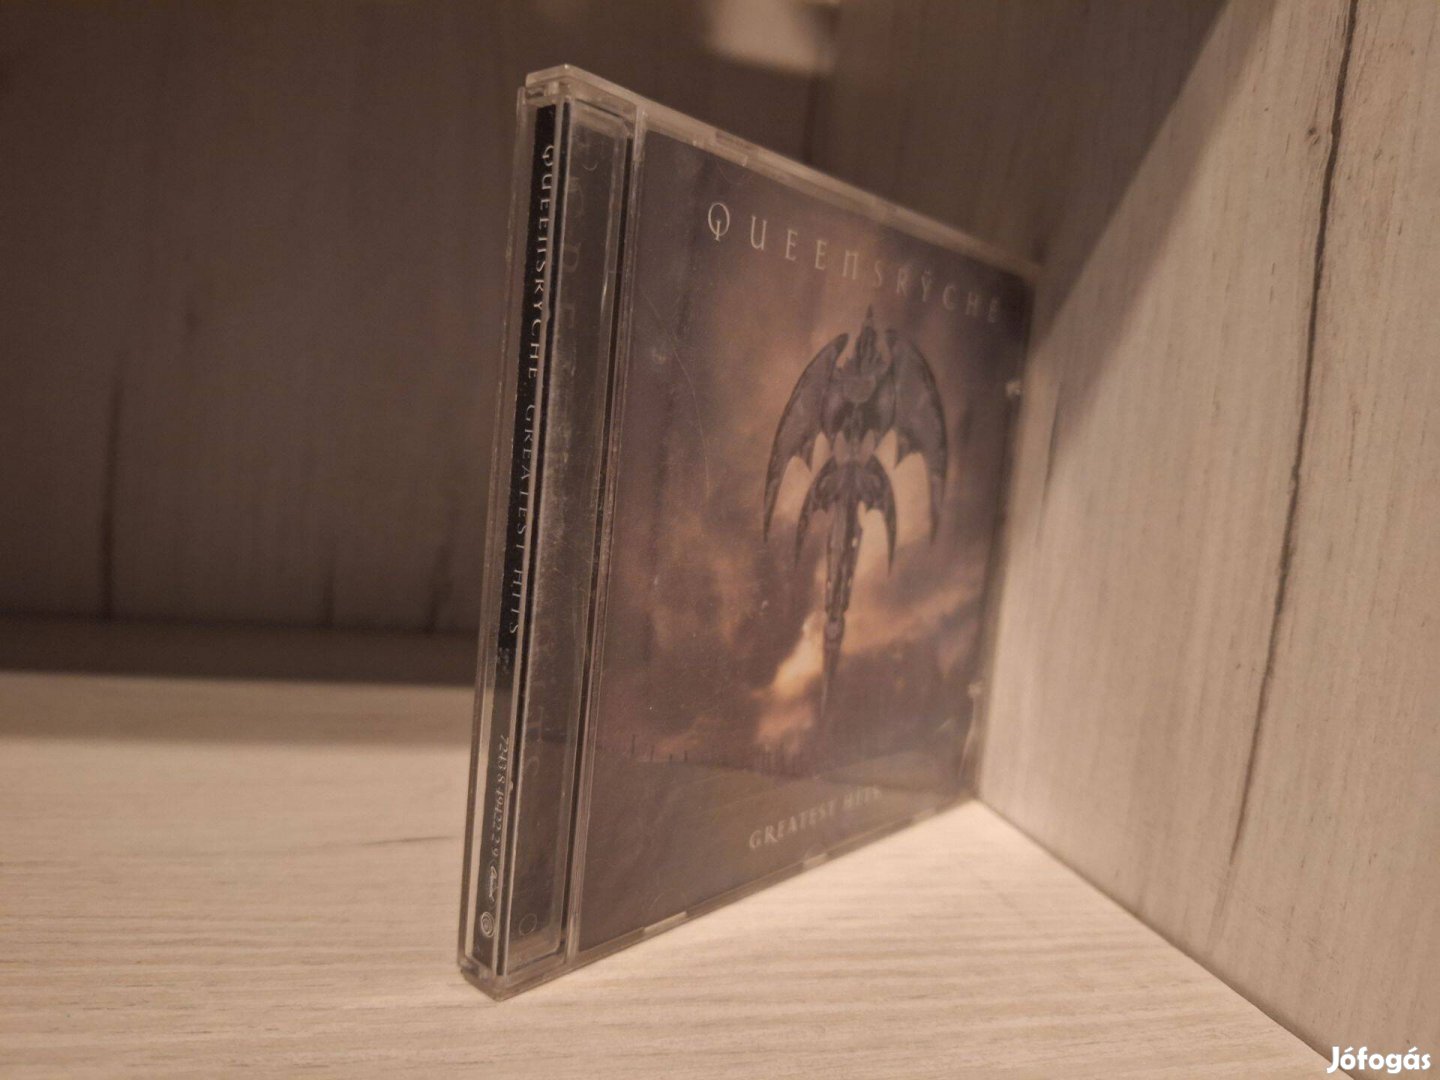 Queensryche - Greatest Hits CD